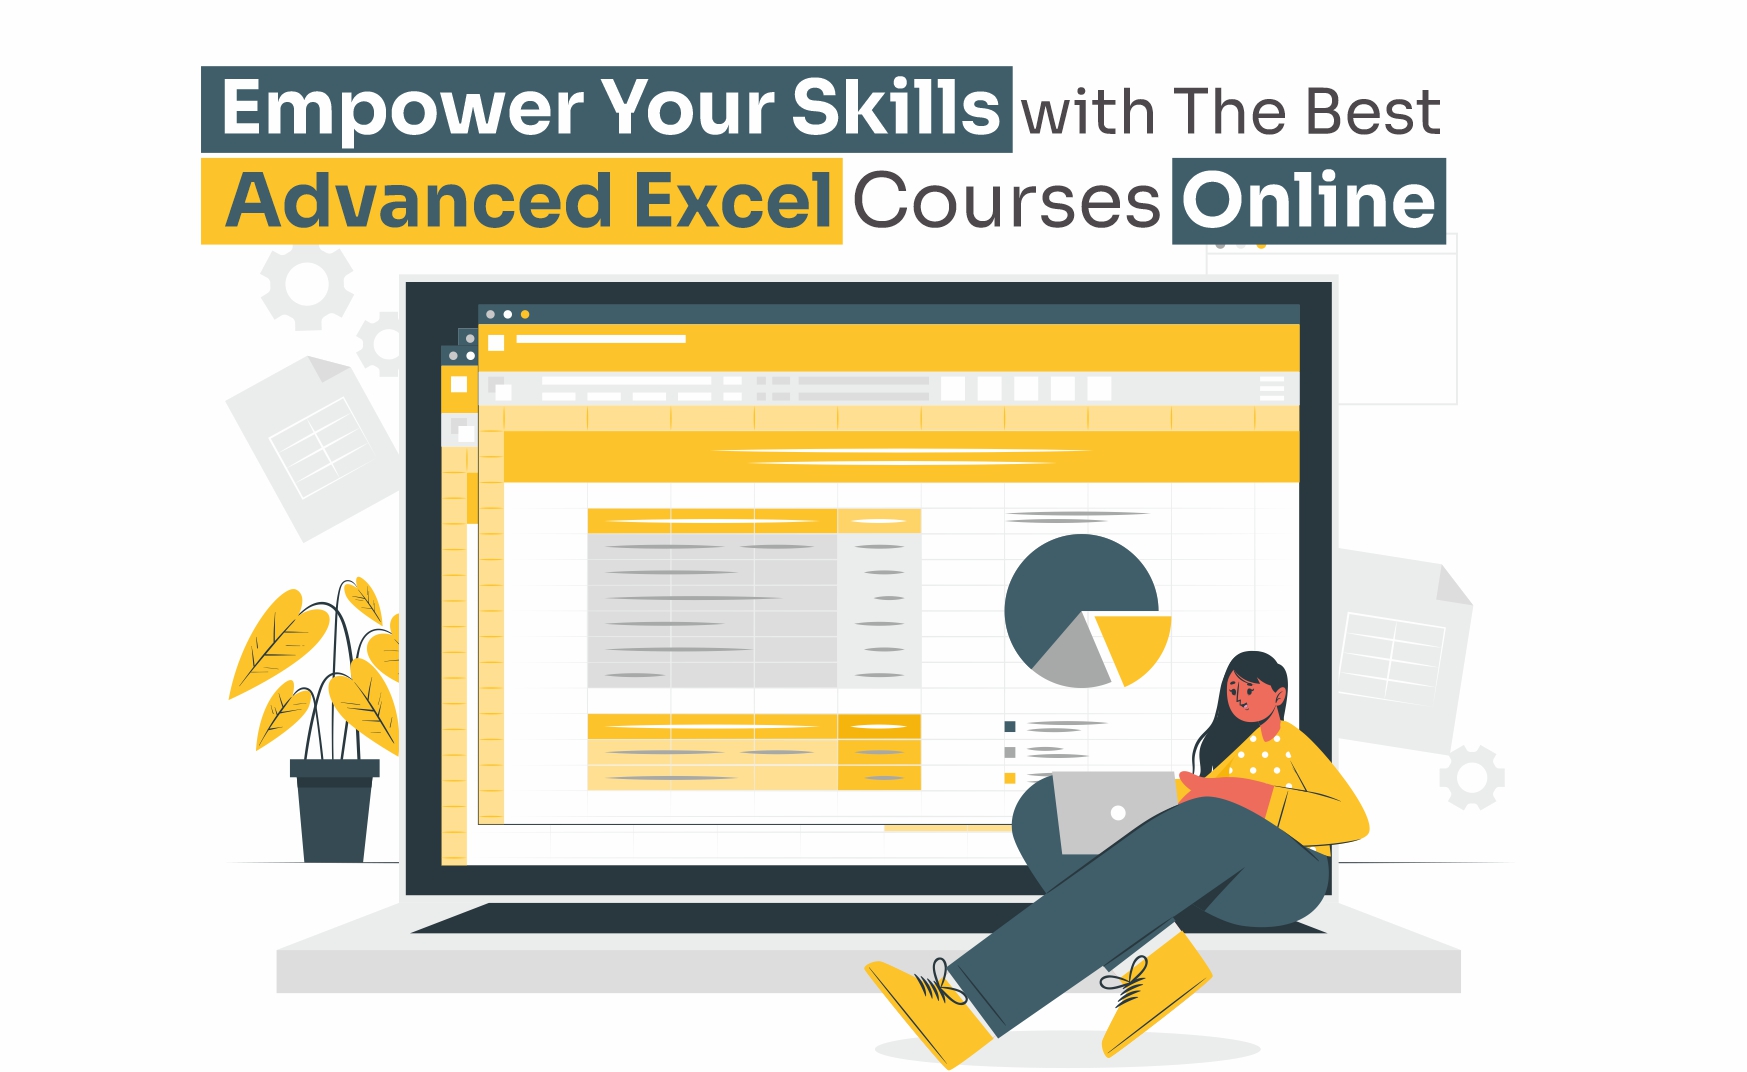 Learn From The Best Advanced Excel Courses Online